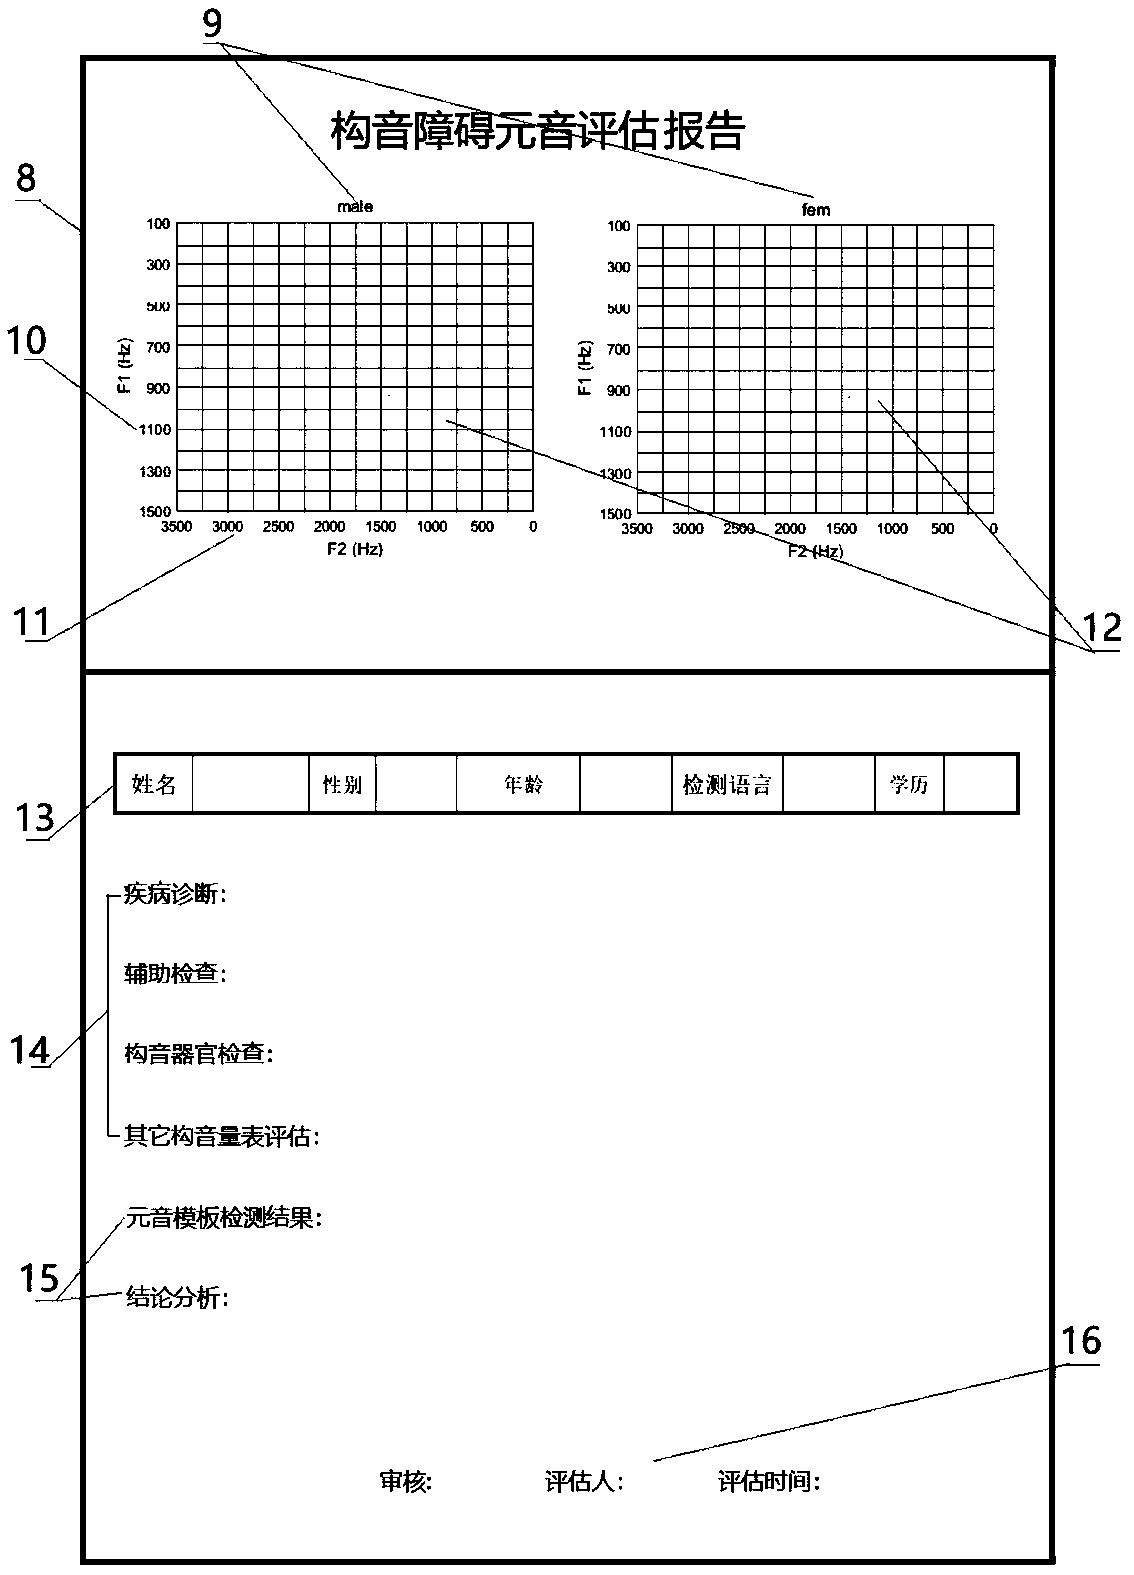 Dysarthria vowel evaluation template and method